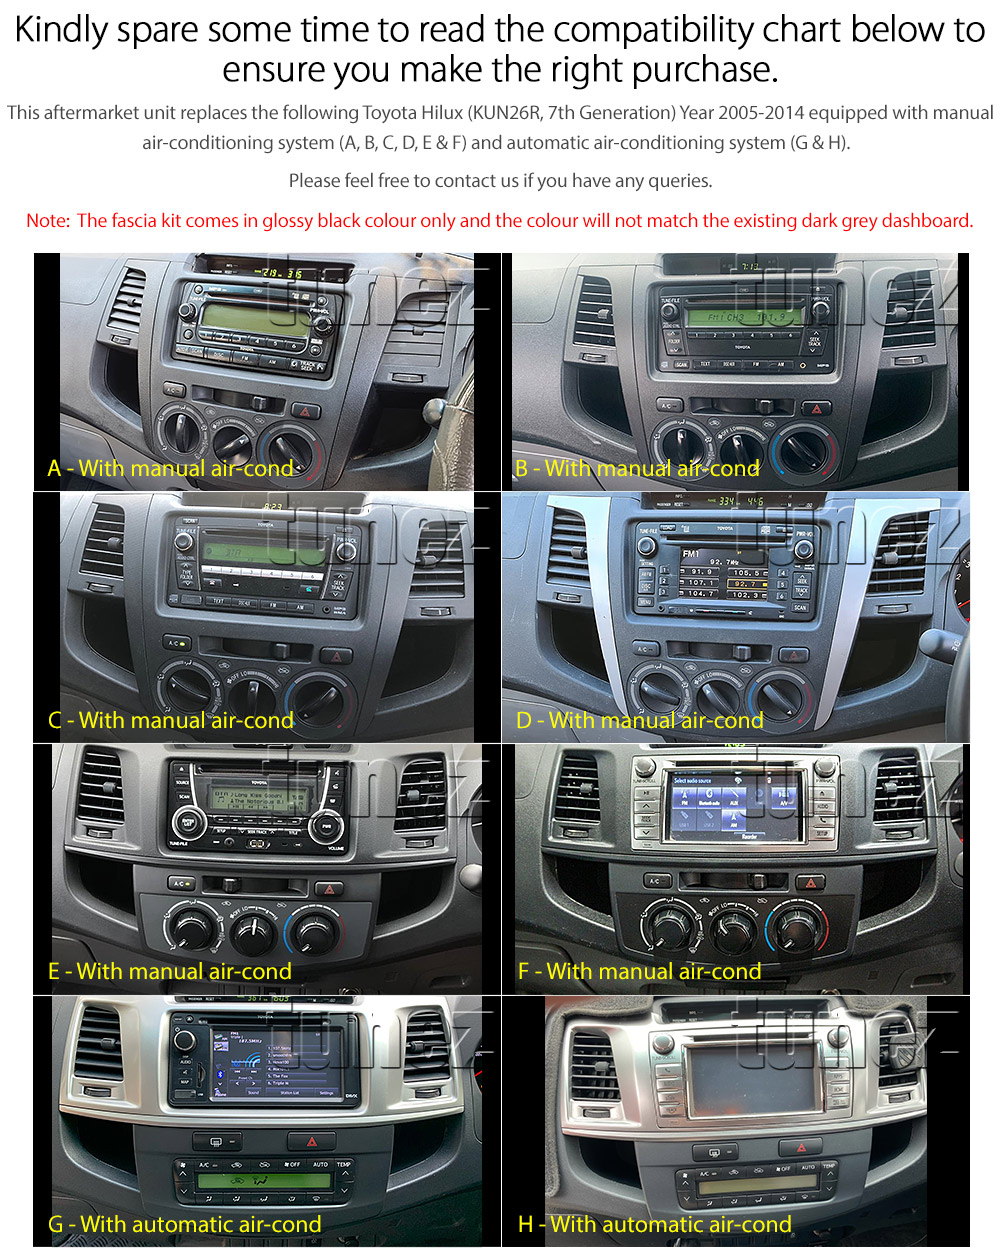 SRRTH03AND GPS Aftermarket Toyota Hilux KUN AN10 AN20 AN30 KUN26 KUN16 7th Gen Generation Year 2005 2006 2007 2008 2009 2010 2011 2012 2013 2014 SR SR5 Workmate Invincible Icon Active chassis capacitive 9 inch 9' touch screen Universal Double DIN Latest Australia UK European Apple CarPlay Android Auto 10 Car USB player radio stereo 4G LTE WiFi head unit details Aftermarket External and Internal Microphone Bluetooth Europe Sat Nav Navi Plug and Play ISO Plug Wiring Harness Matching Fascia Kit Facia Free Reversing Camera Album Art ID3 Tag RMVB MP3 MP4 AVI MKV Full High Definition FHD 1080p DAB+ Digital Radio DAB + Connects2 CTSTY008.2 CTSTY00C CTSTY00CAMP CTSTY013.2